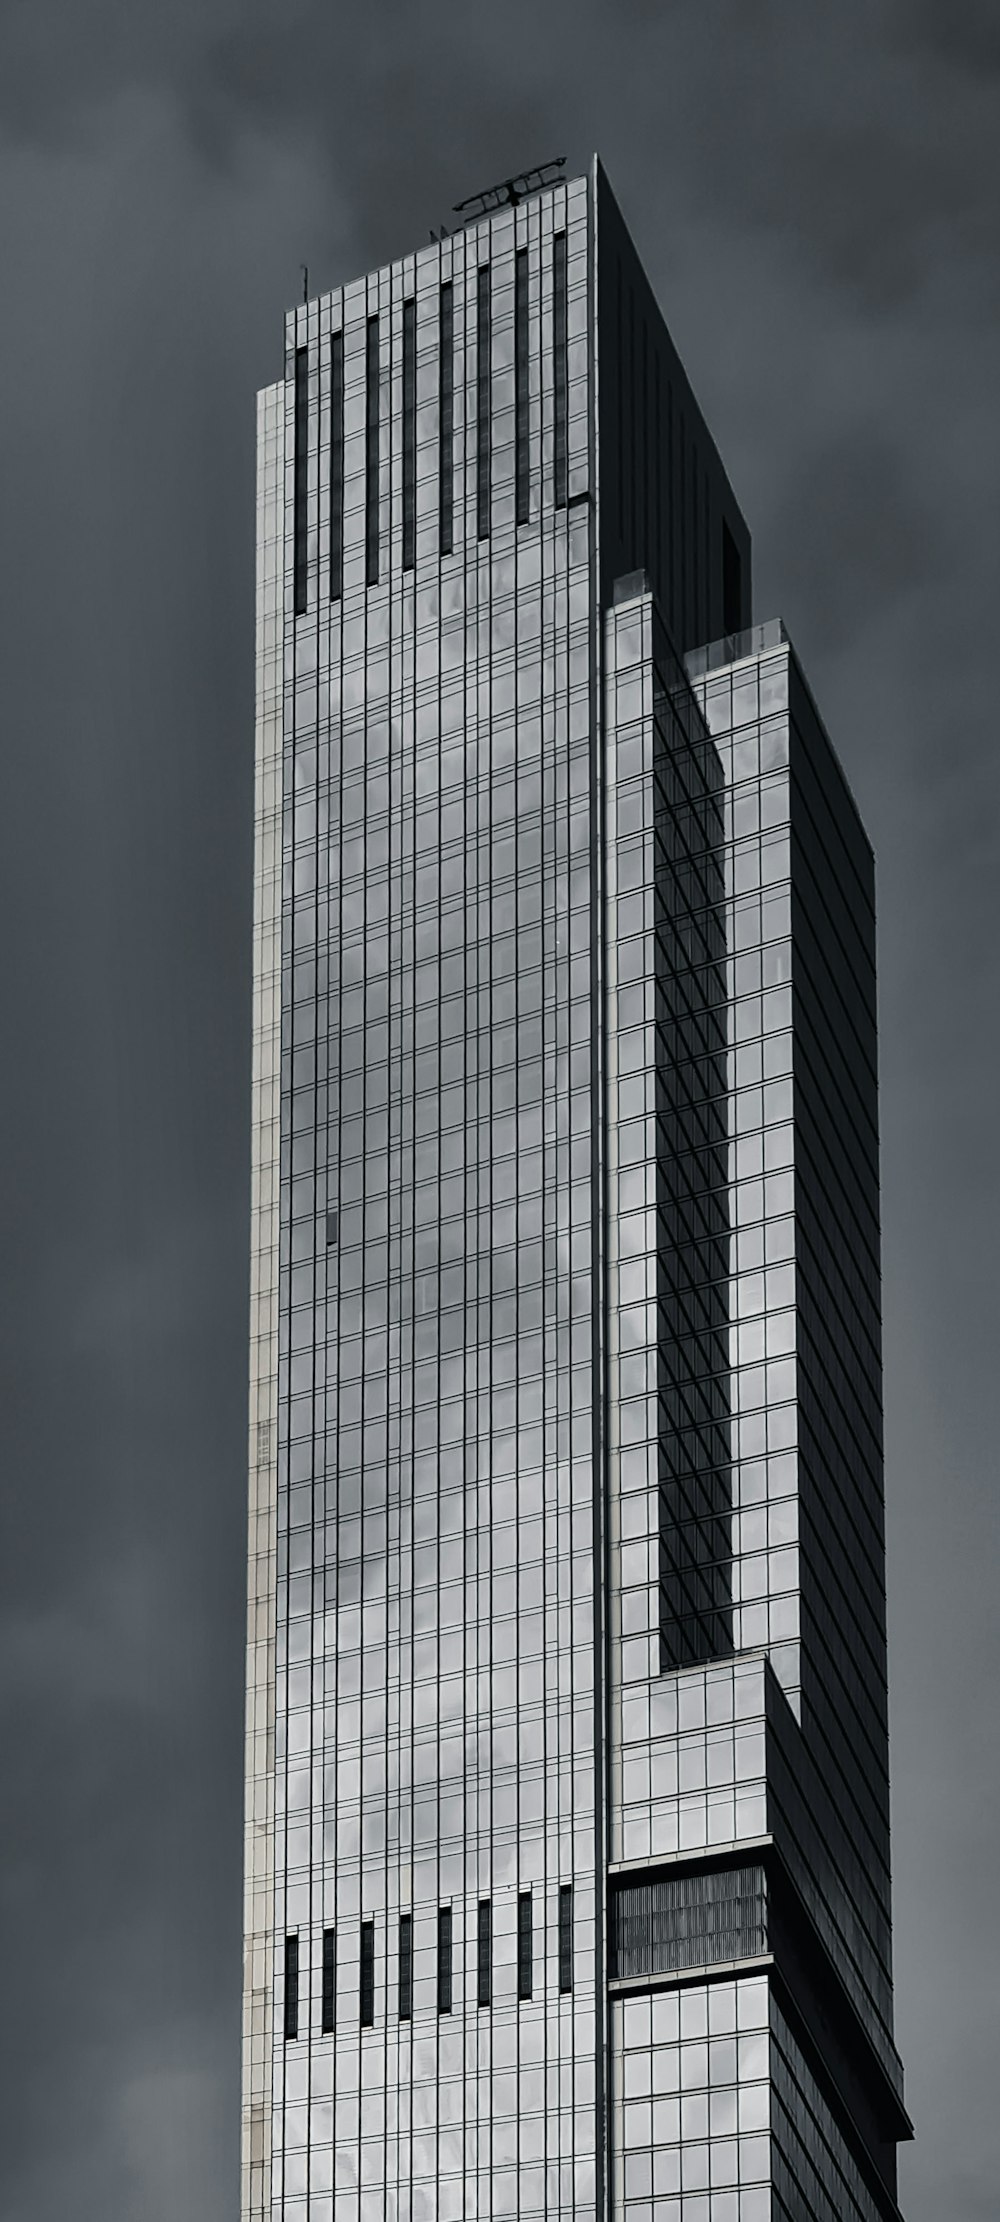 a very tall building sitting under a cloudy sky